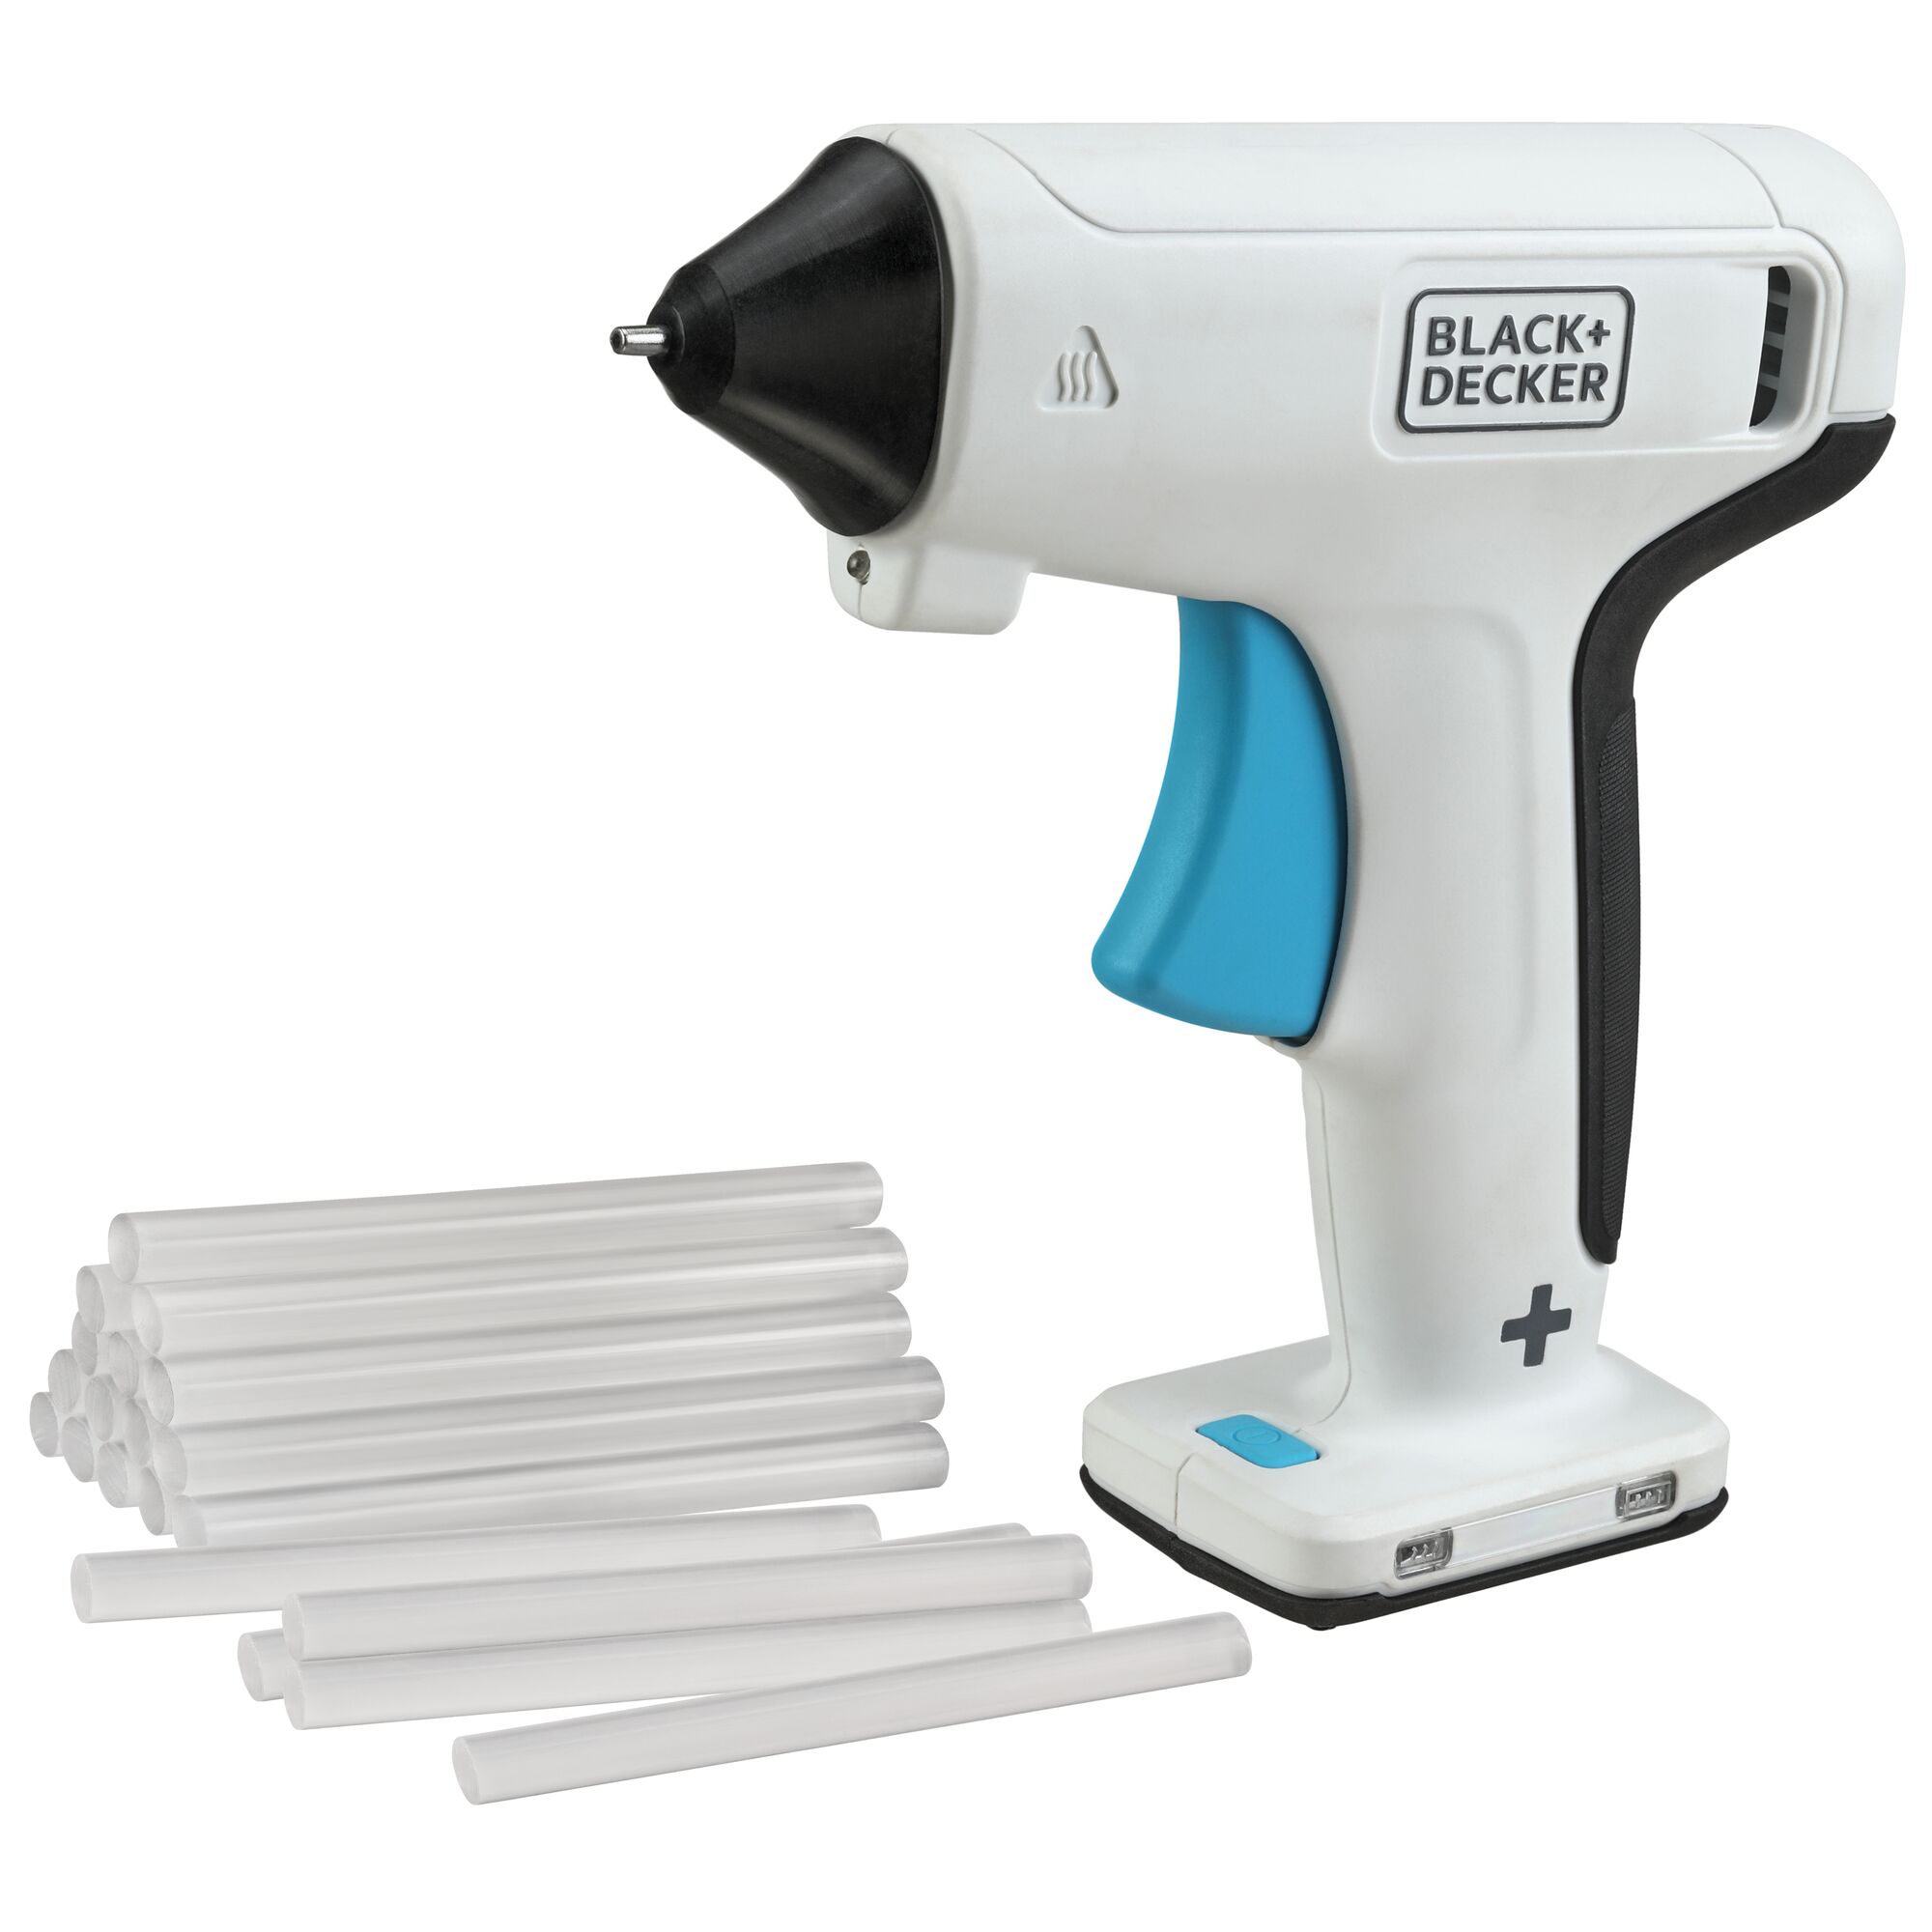 BLACK+DECKER cordless glue gun with the 20 mini glue sticks that are included with purchase